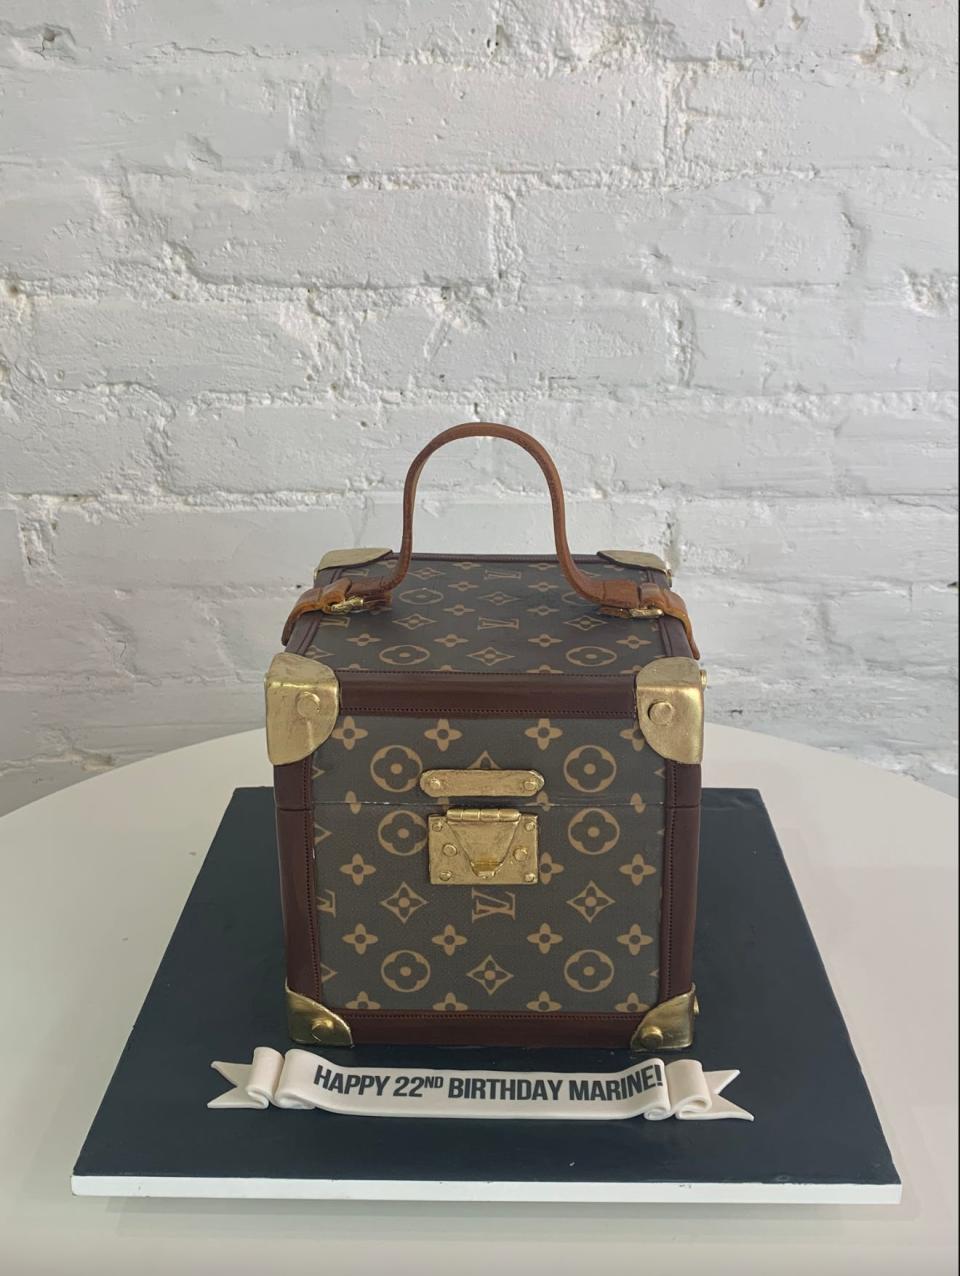 A cake replica of a Louis Vuitton handbag with the words, "Happy 22nd birthday Marine!" at the base.